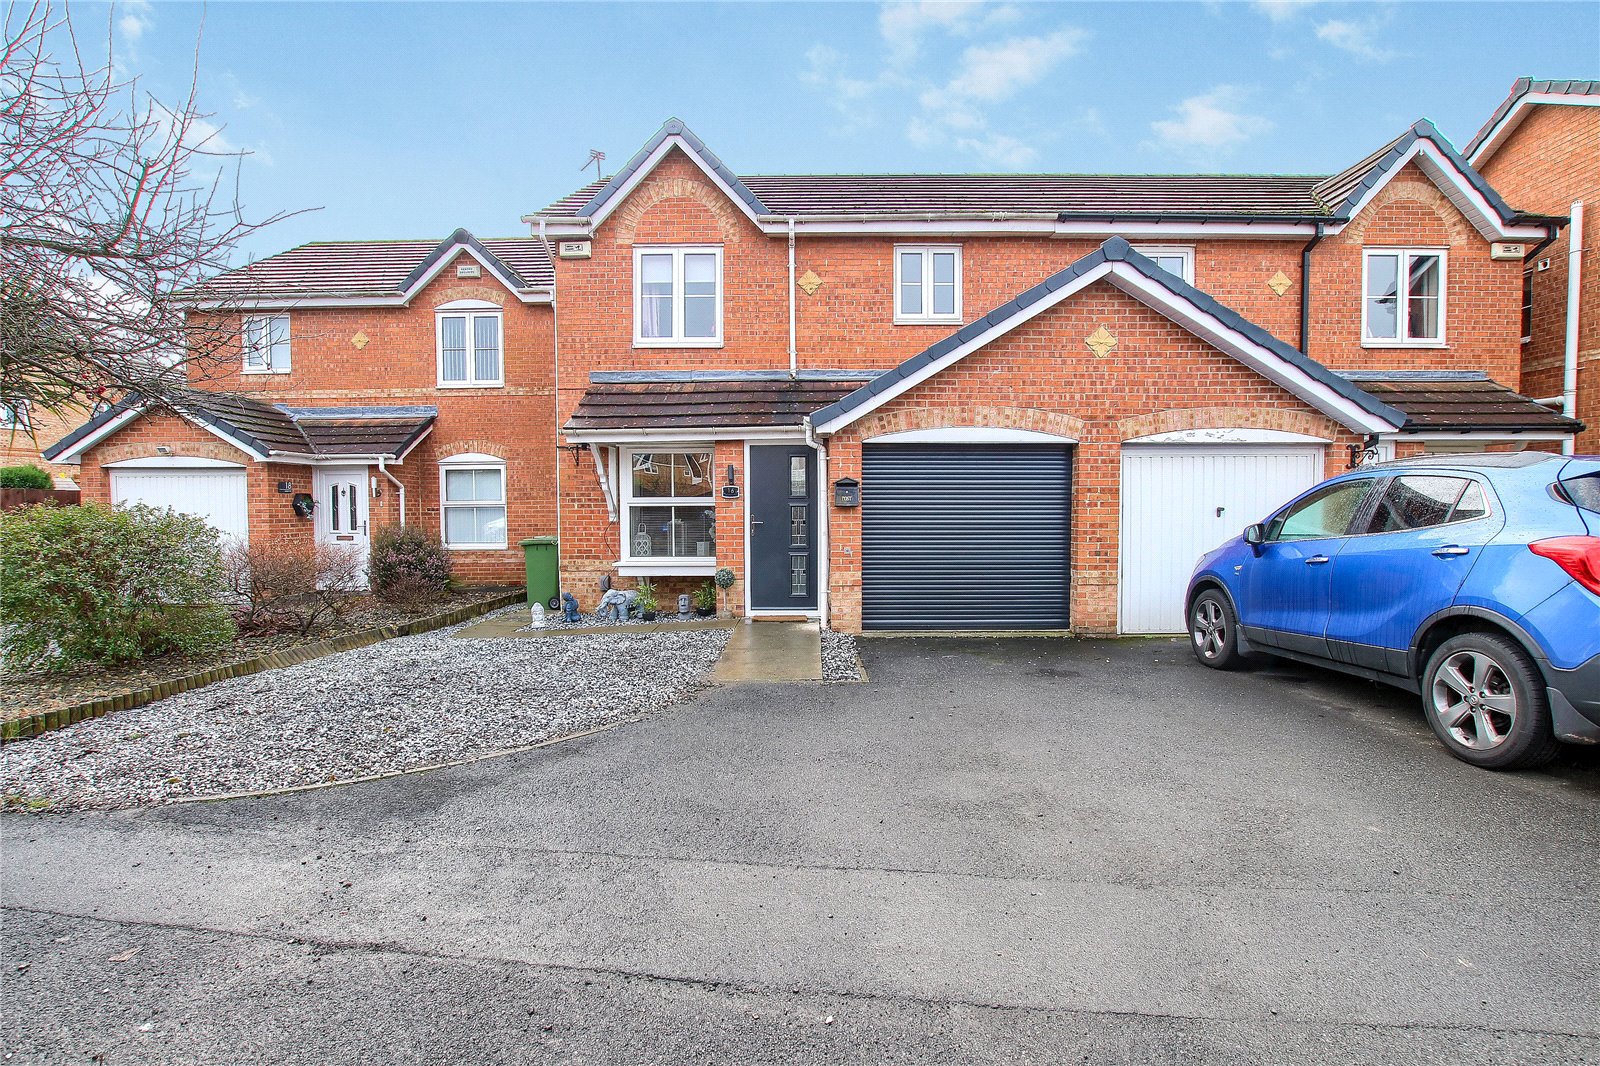 3 bed house for sale in Leazon Hill, Ingleby Barwick - Property Image 1